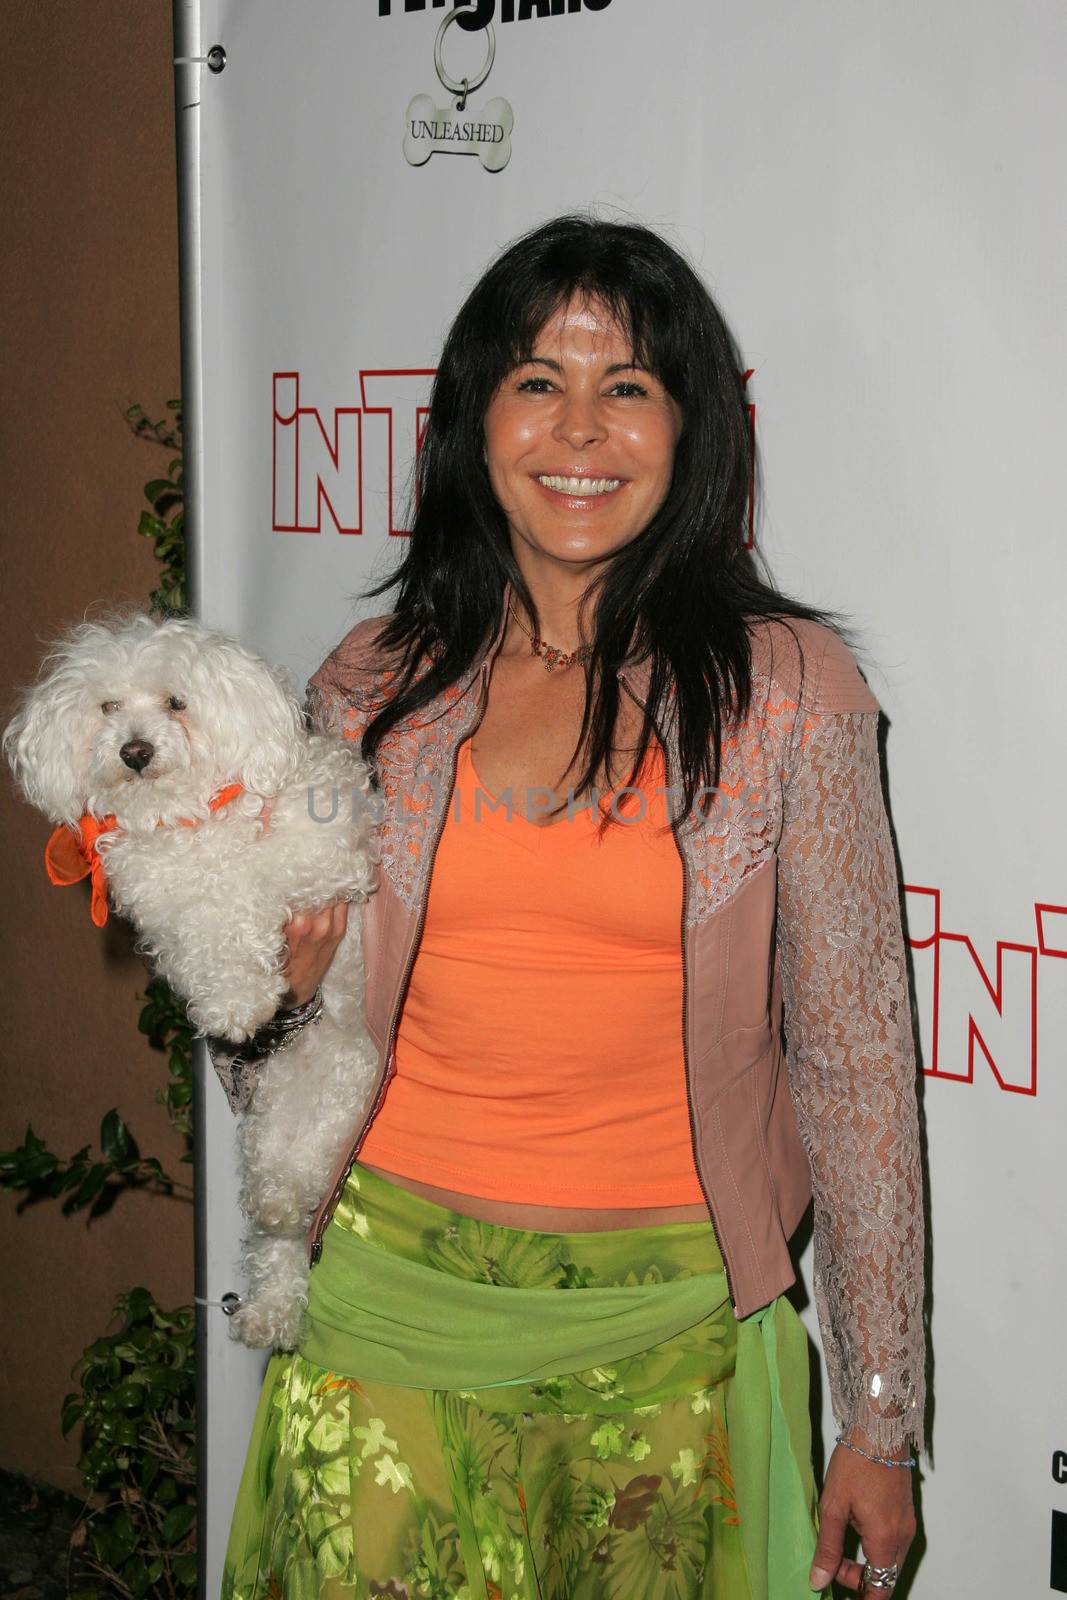 Maria Conchita Alonso at the In Touch Presents Pets And Their Stars Party, Cabana Club, Hollywood, CA 09-21-05